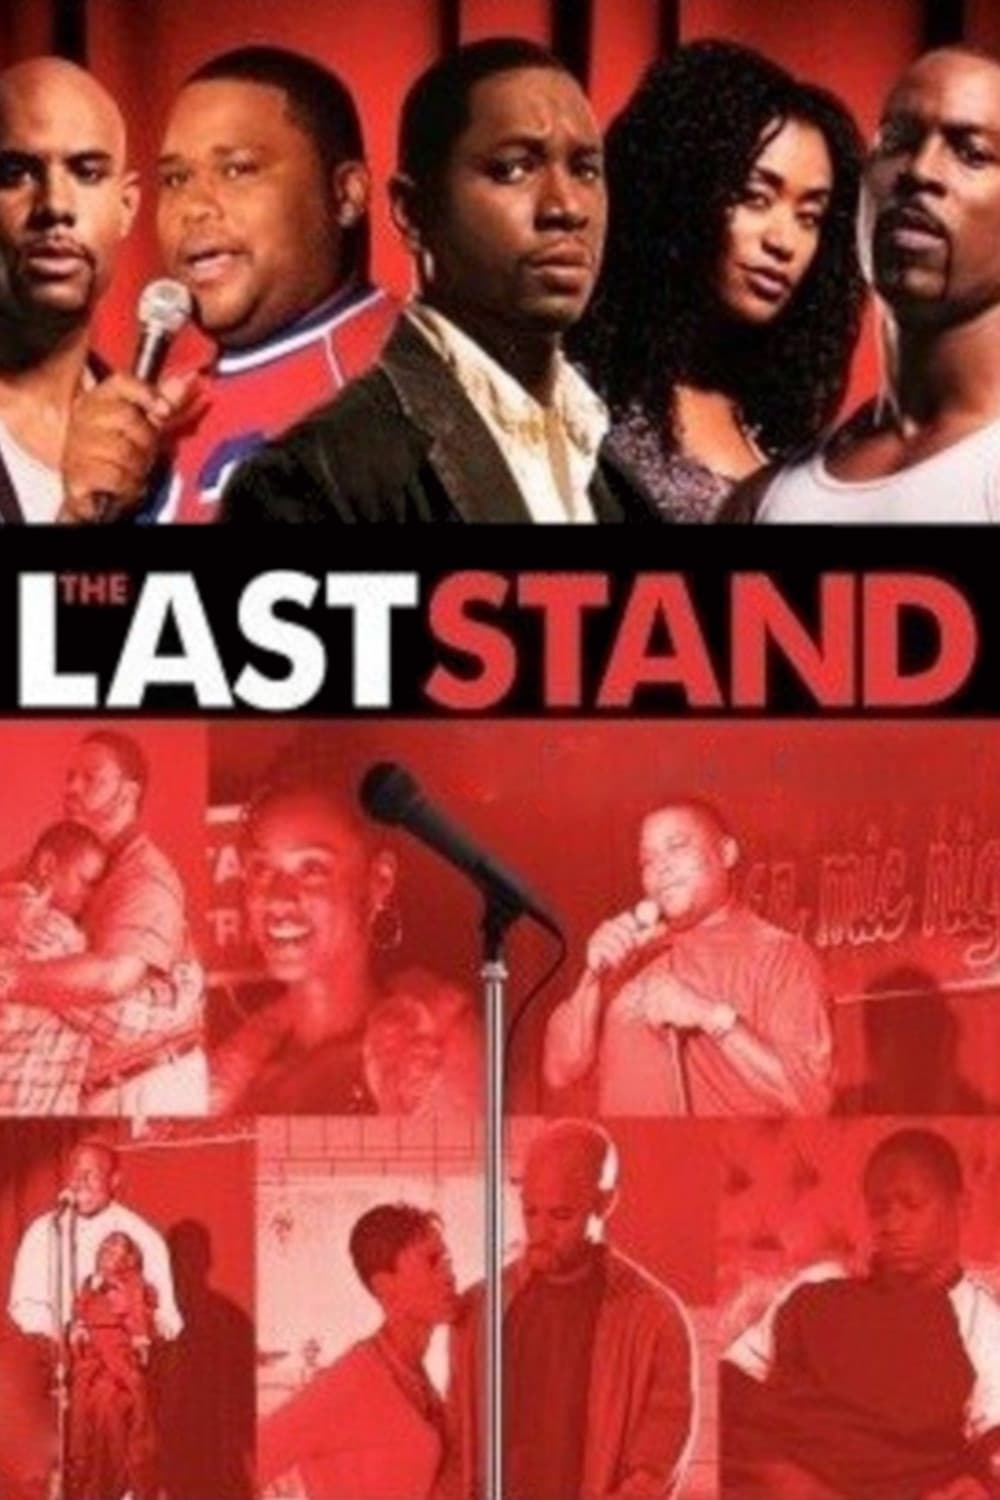 The Last Stand film